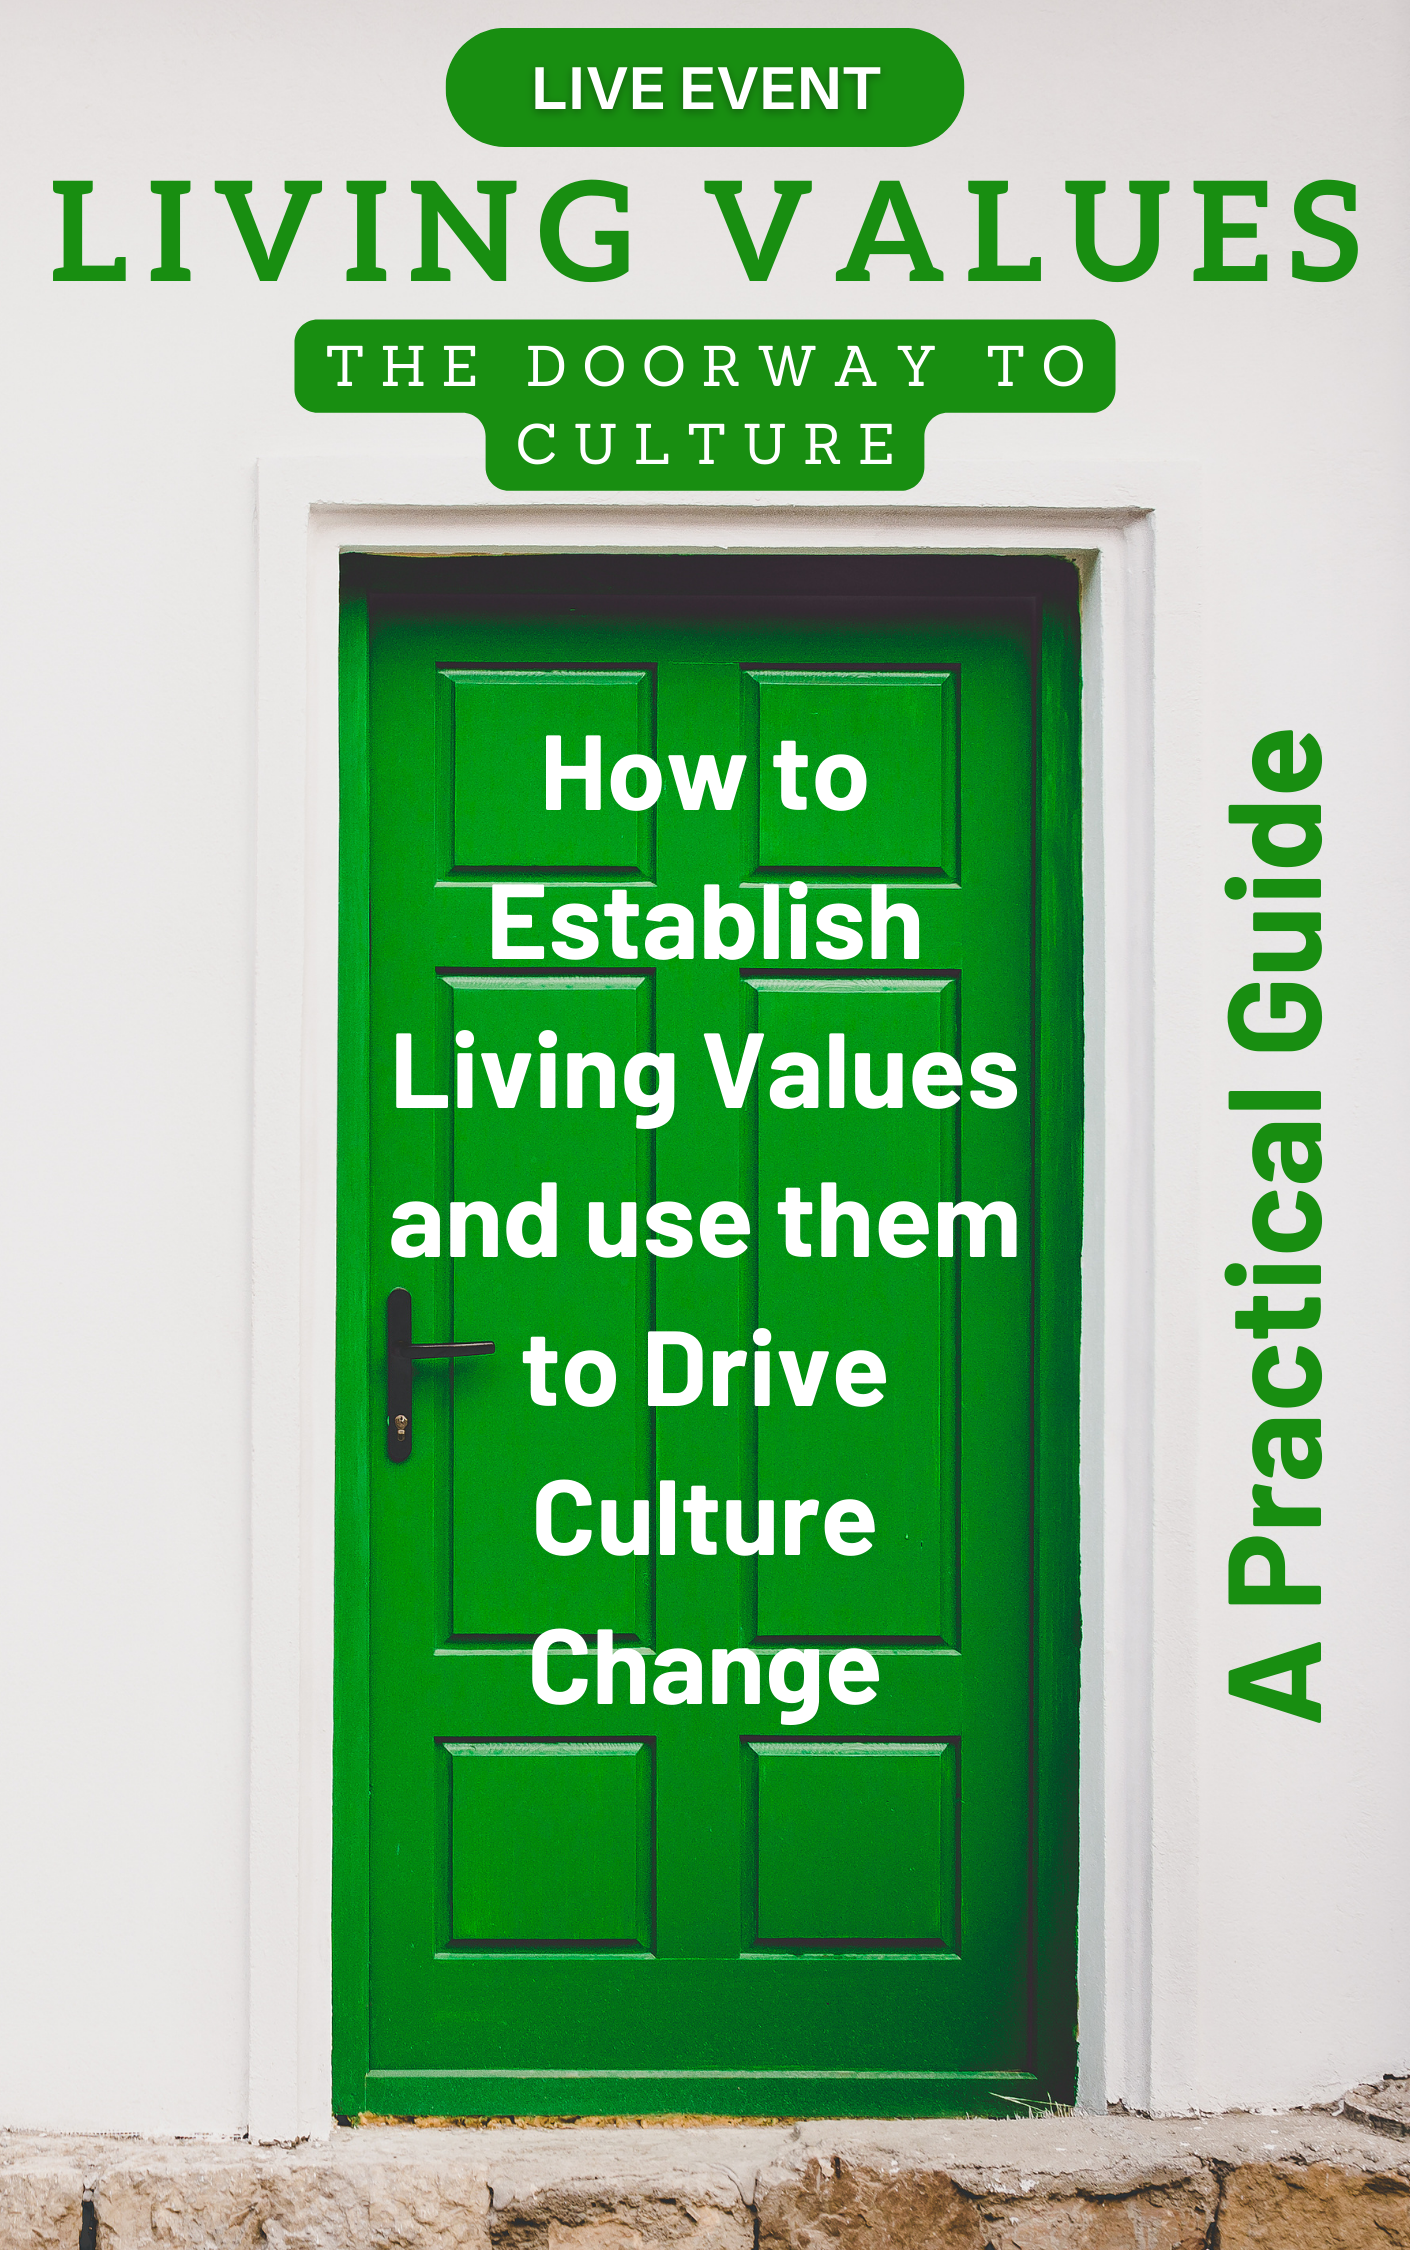 Values and Culture Change